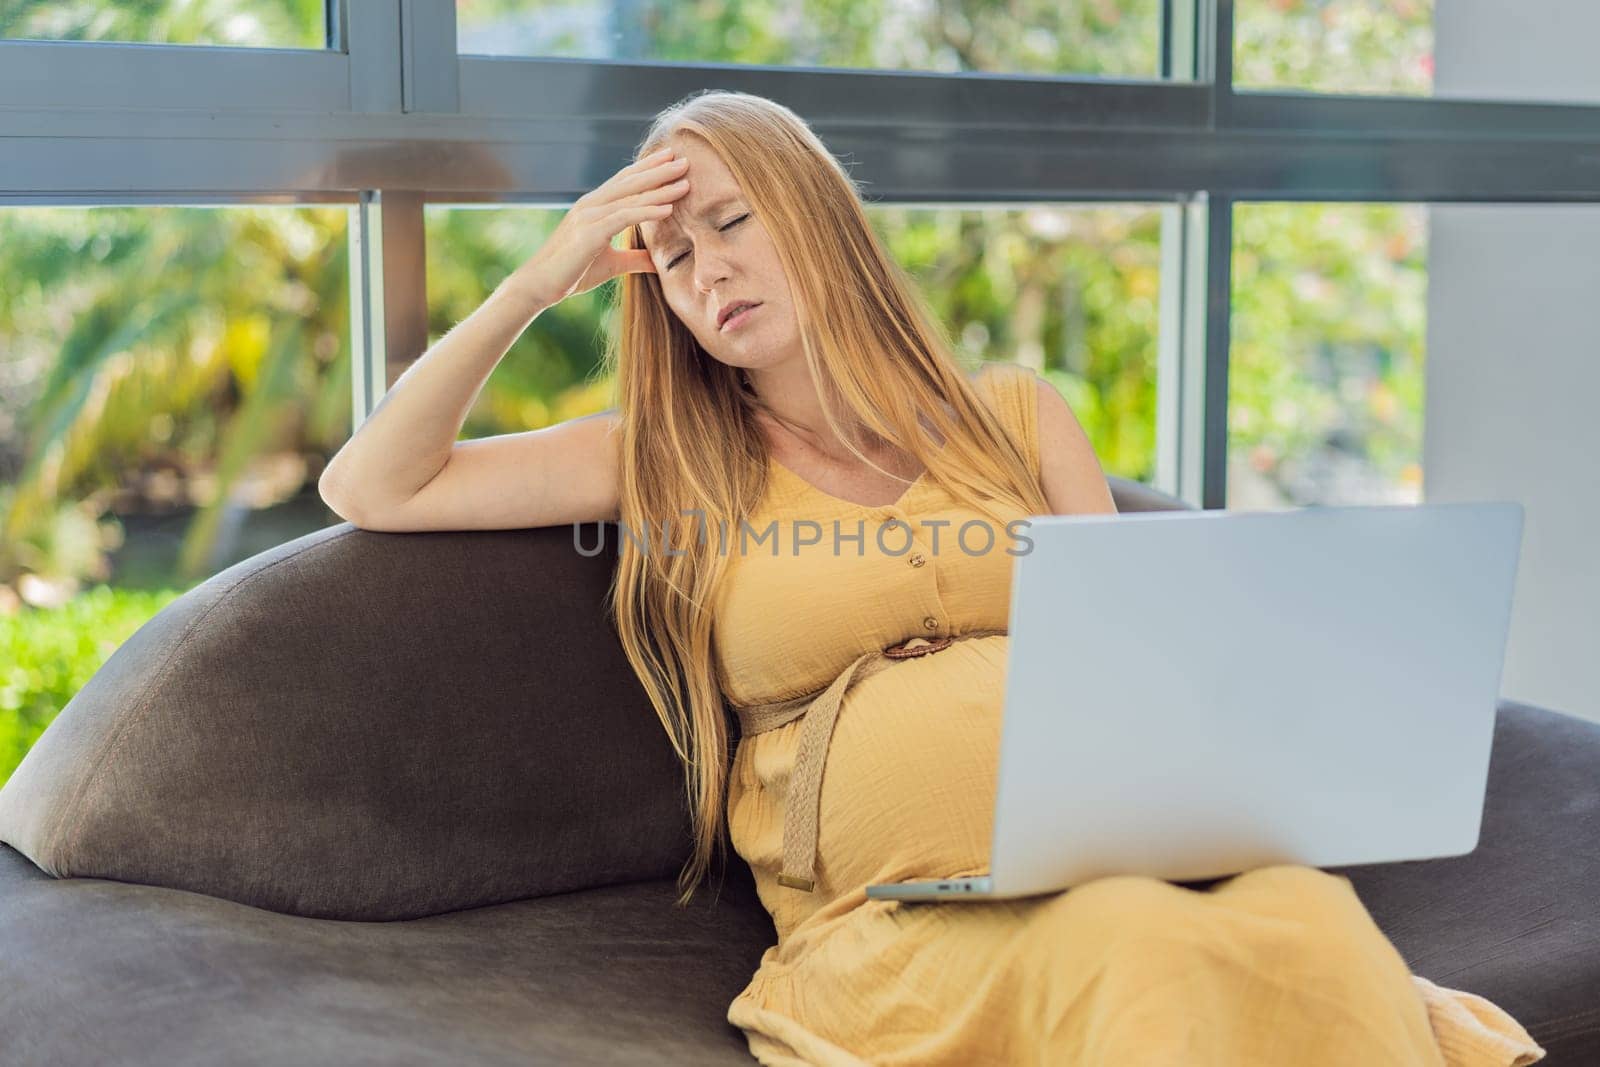 Weary pregnant woman, tired of working from home, navigates the challenges of balancing professional tasks with pregnancy demands by galitskaya